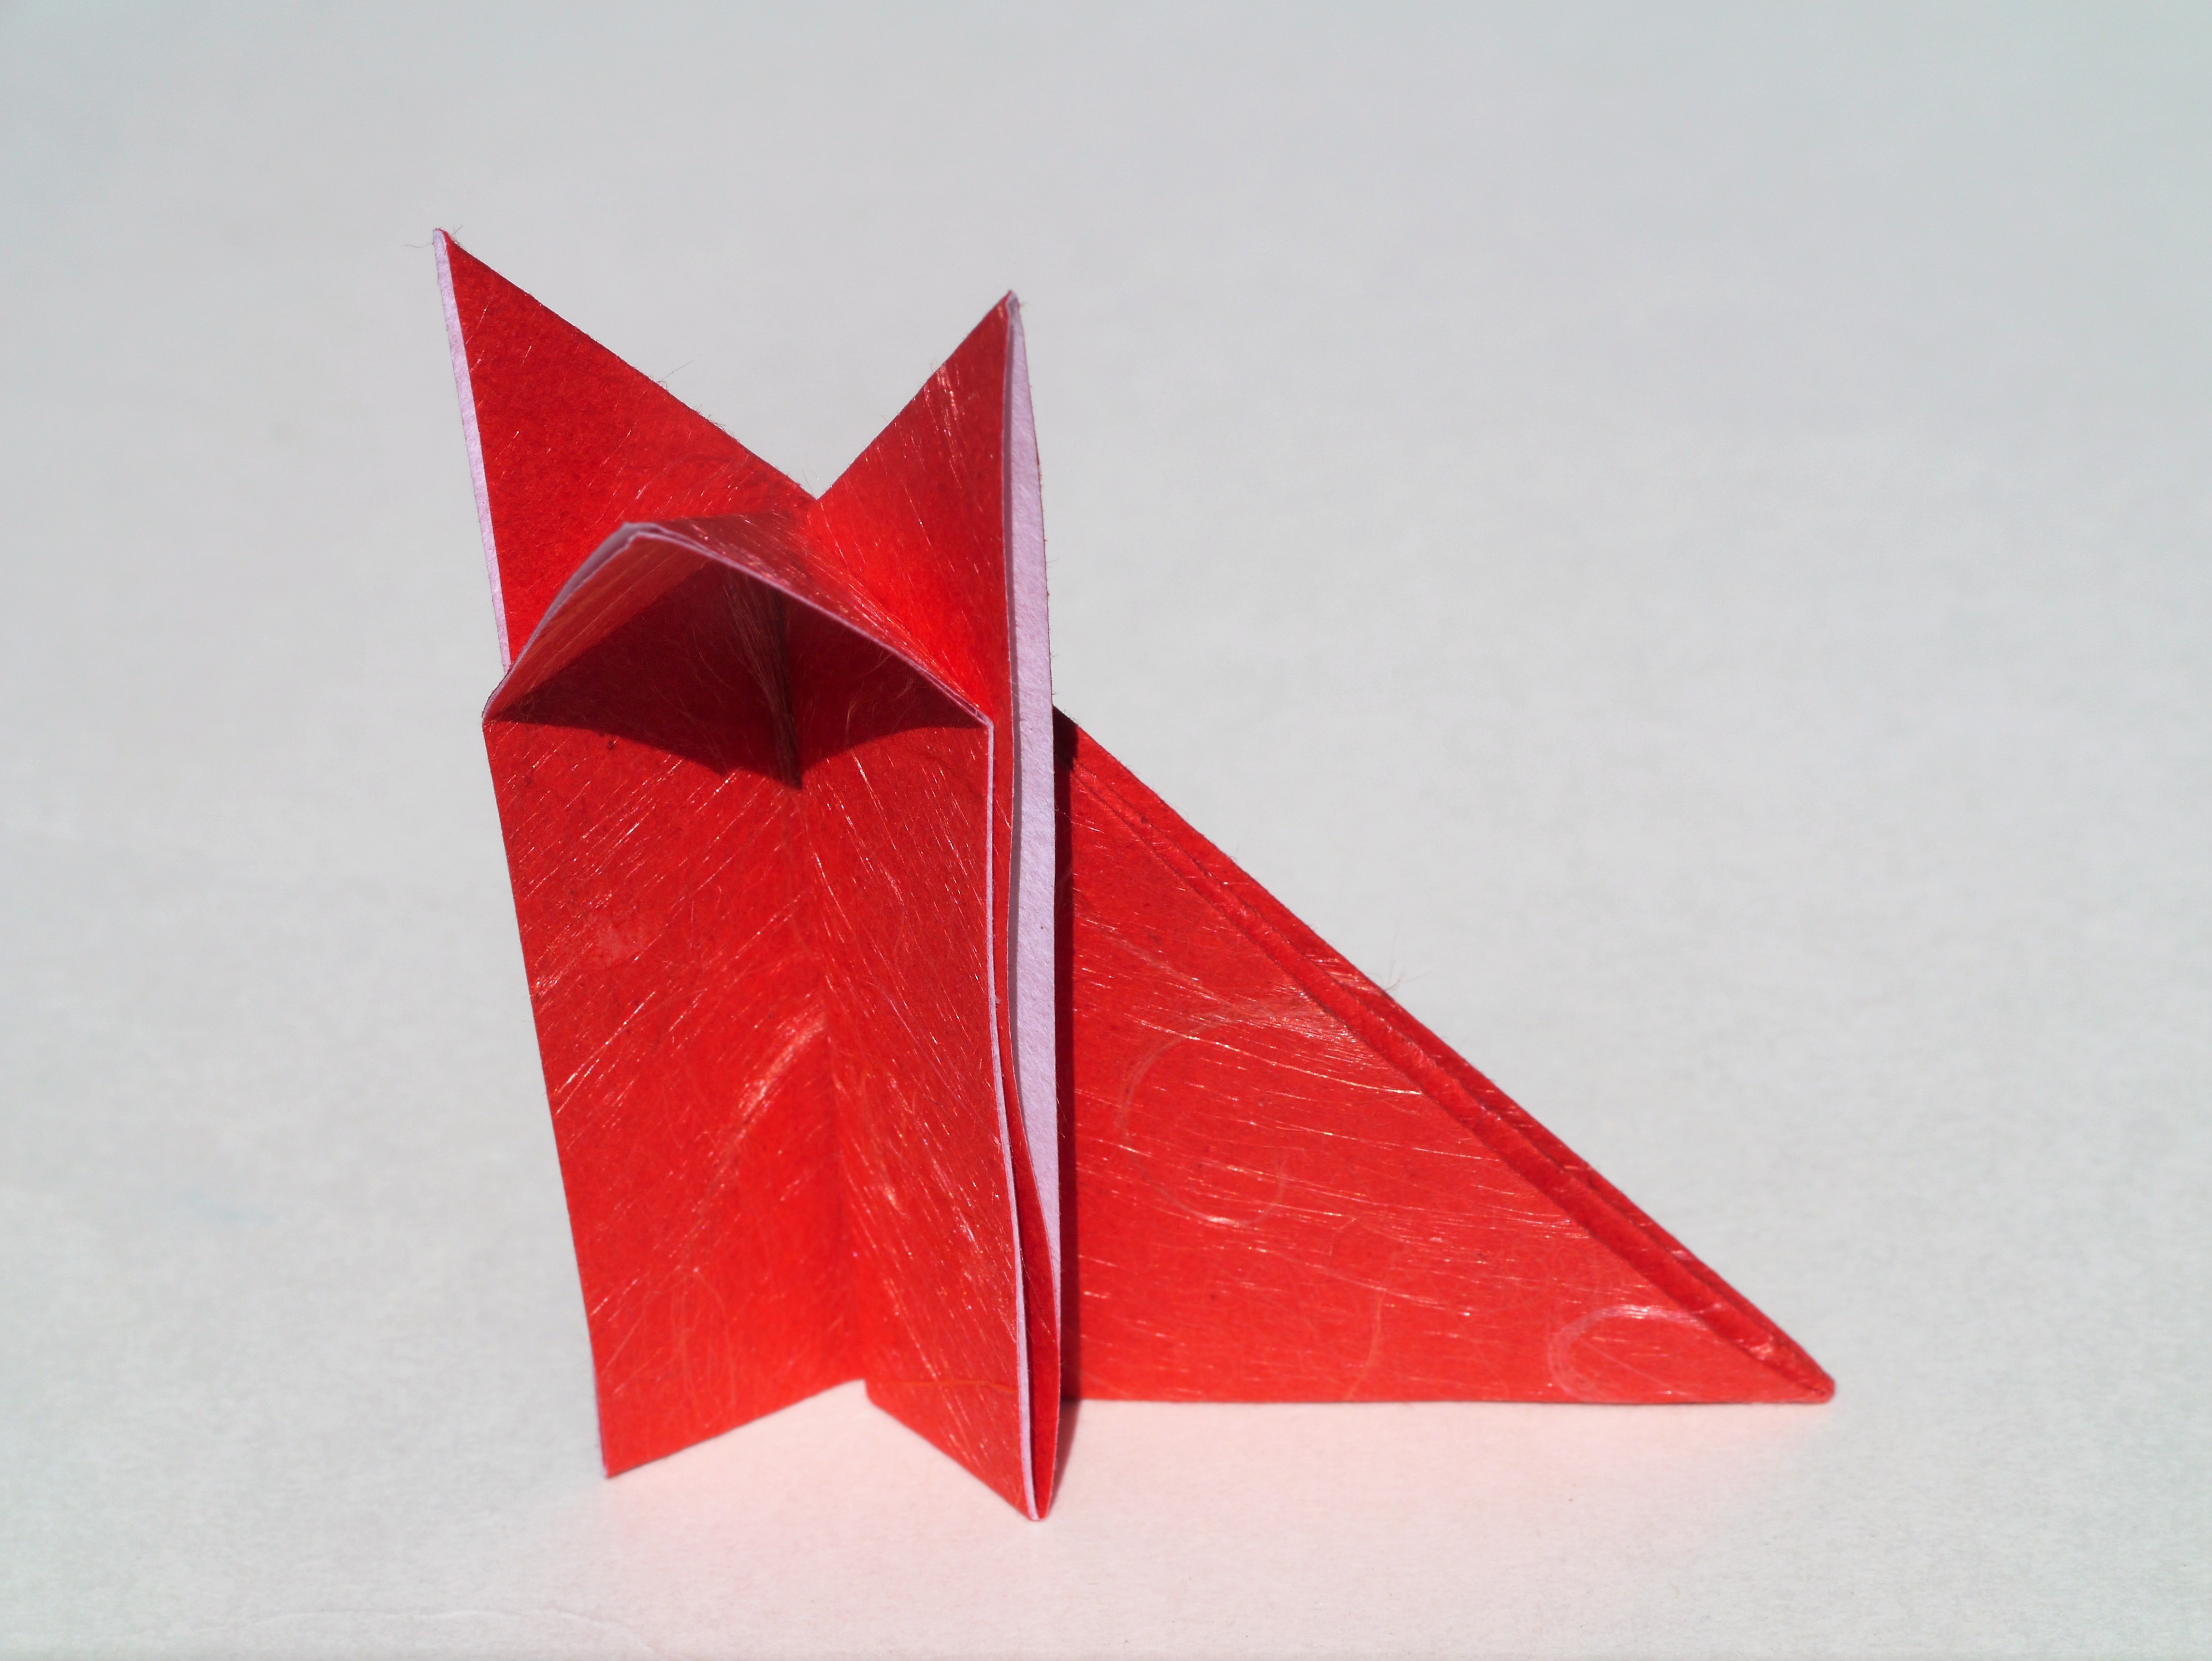 You just learned how to make an origami fox!